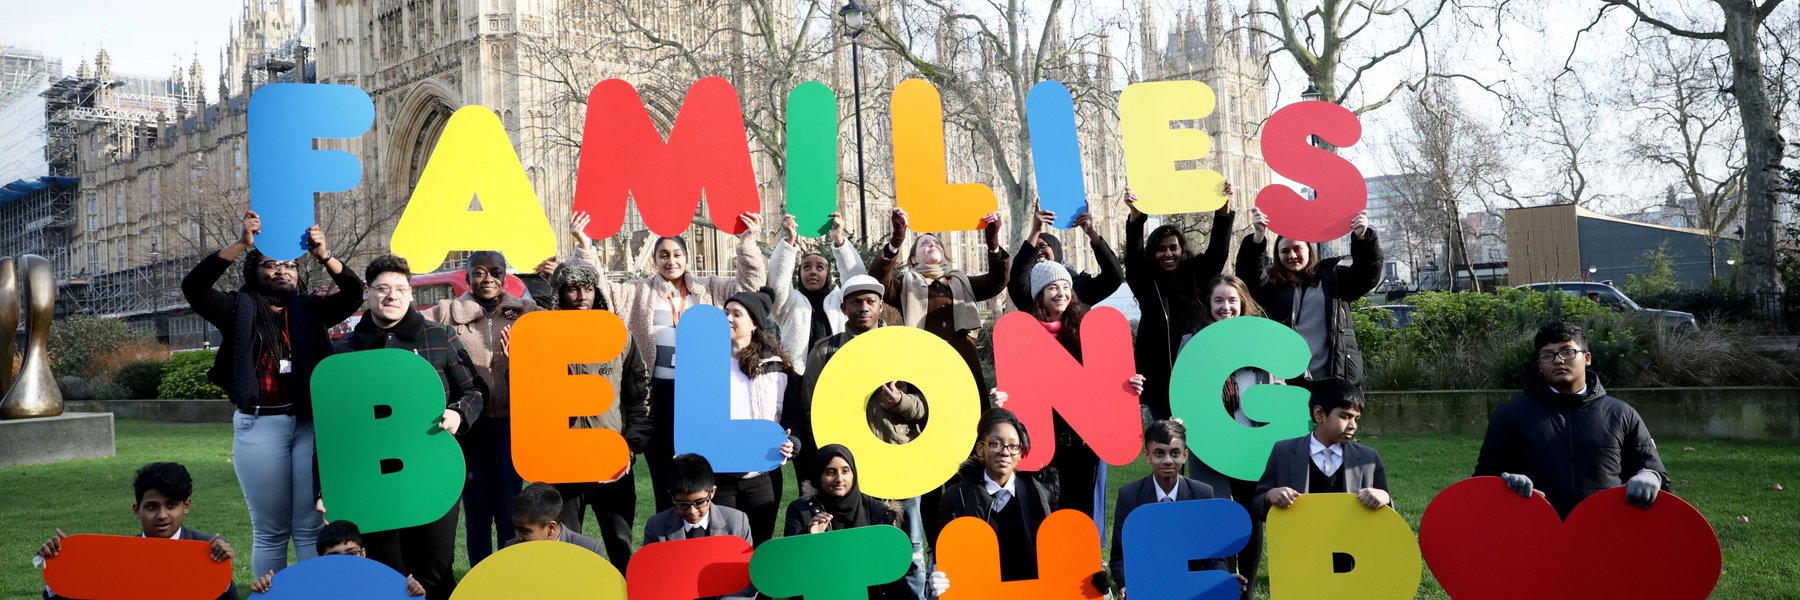 Campaigners hold large letters spelling 'Families Belong Together'